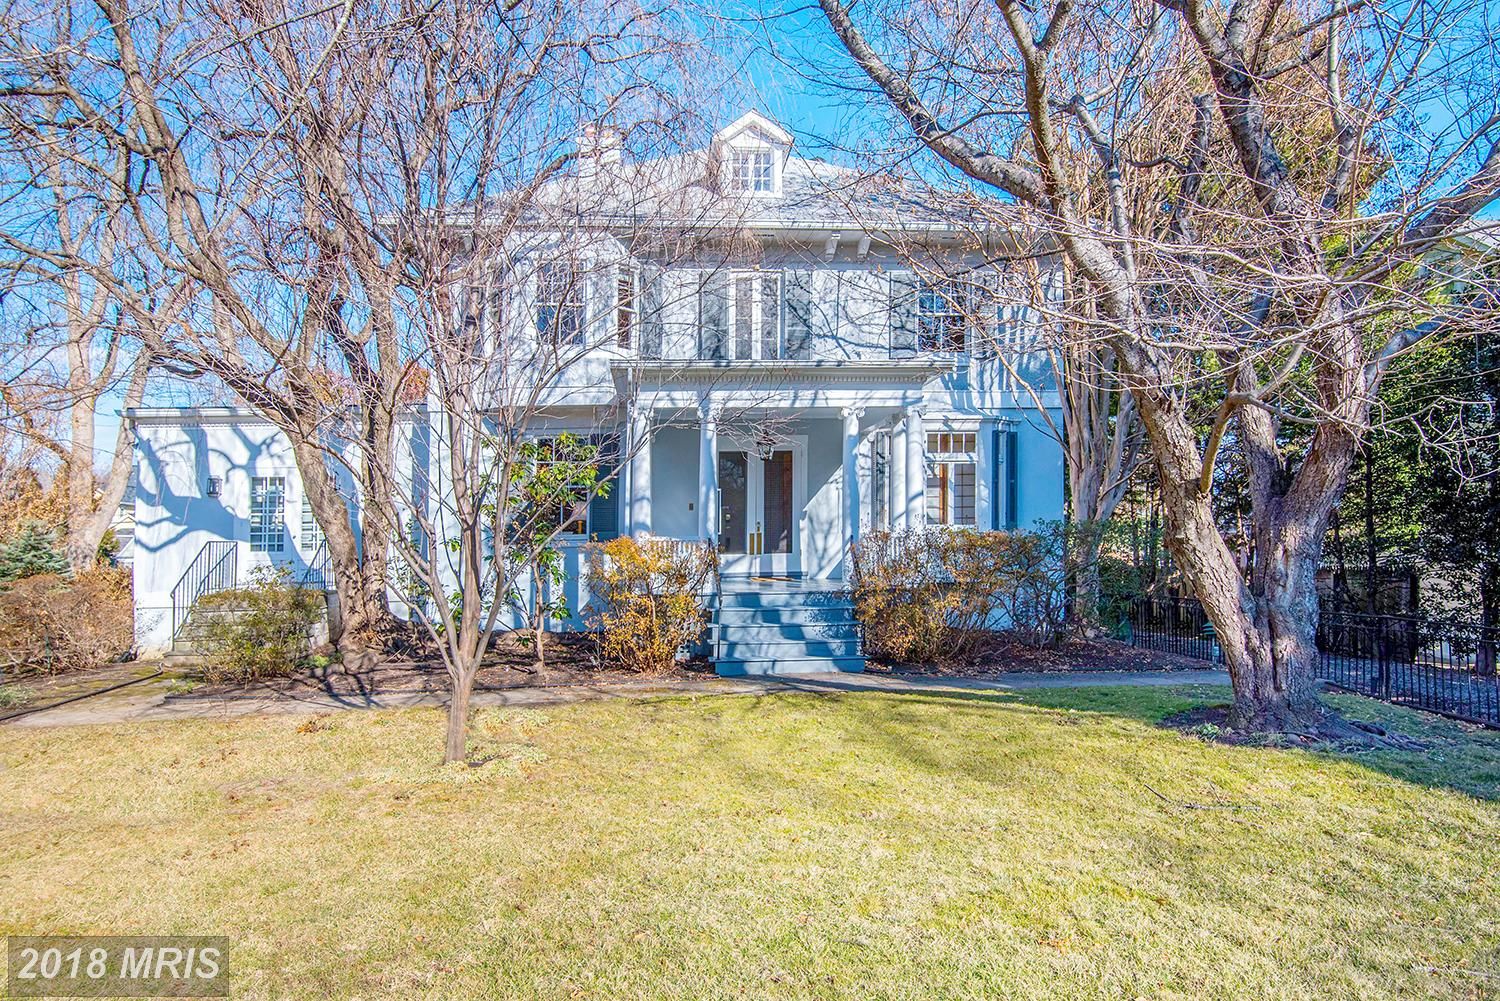 10. $2,535,000

3709 Bradley Lane
Chevy Chase, Maryland

This traditional style detached home was built in 1916. It has four full bathrooms and six bedrooms.

(Courtesy Bright MLS)